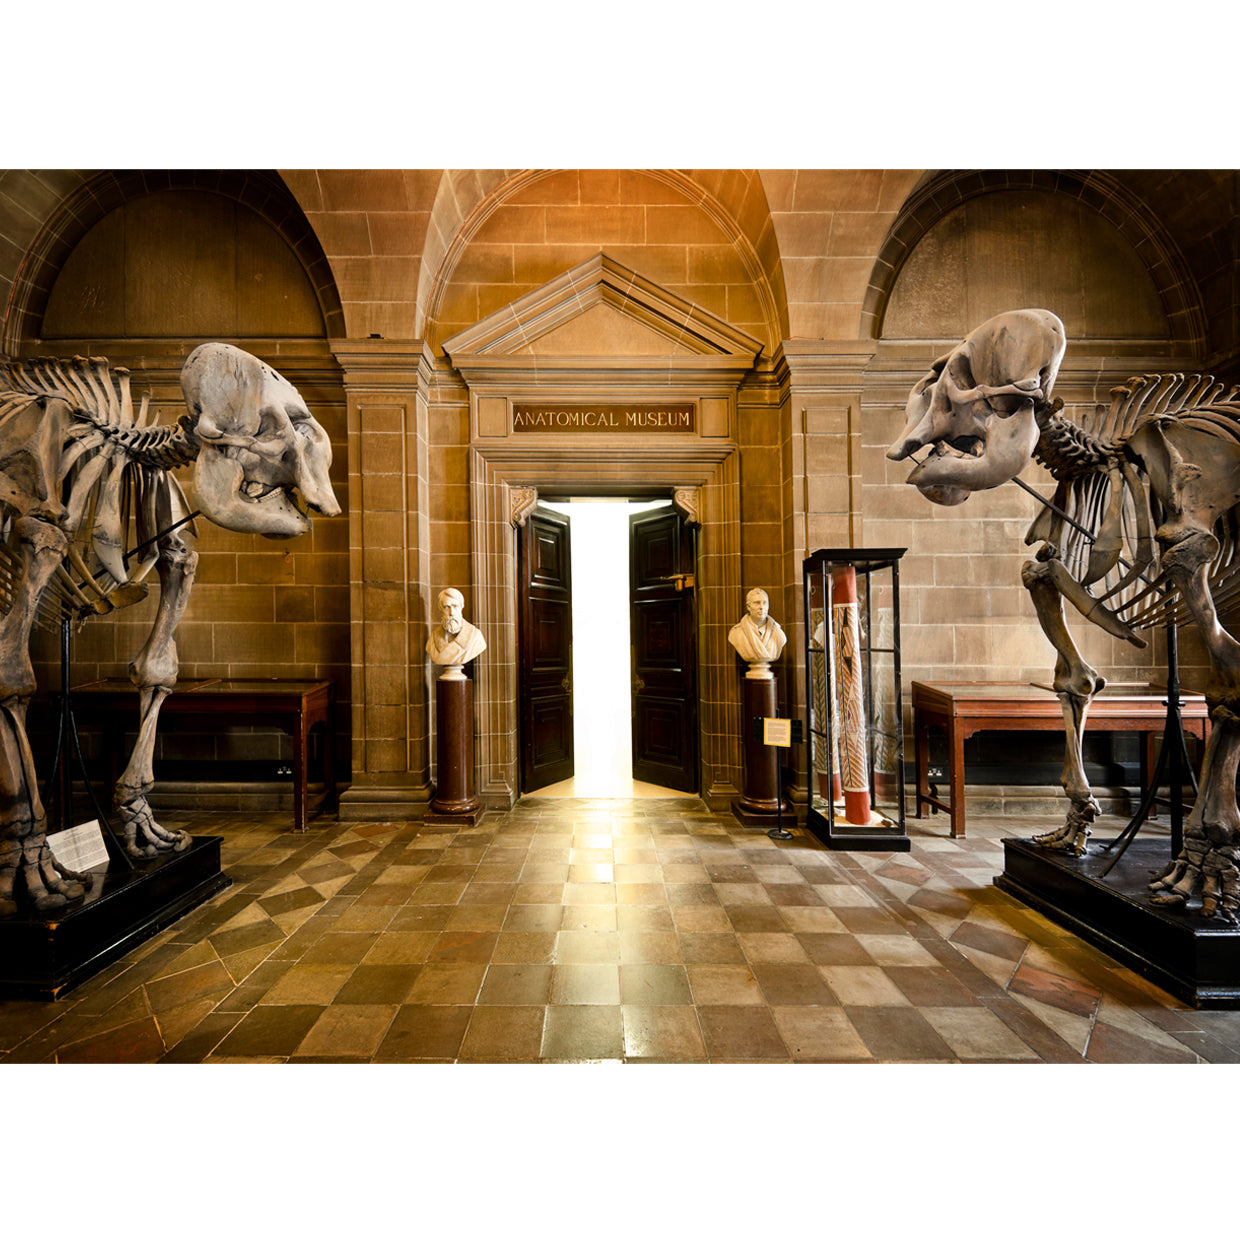 Photograph of the Anatomical Museum entrance